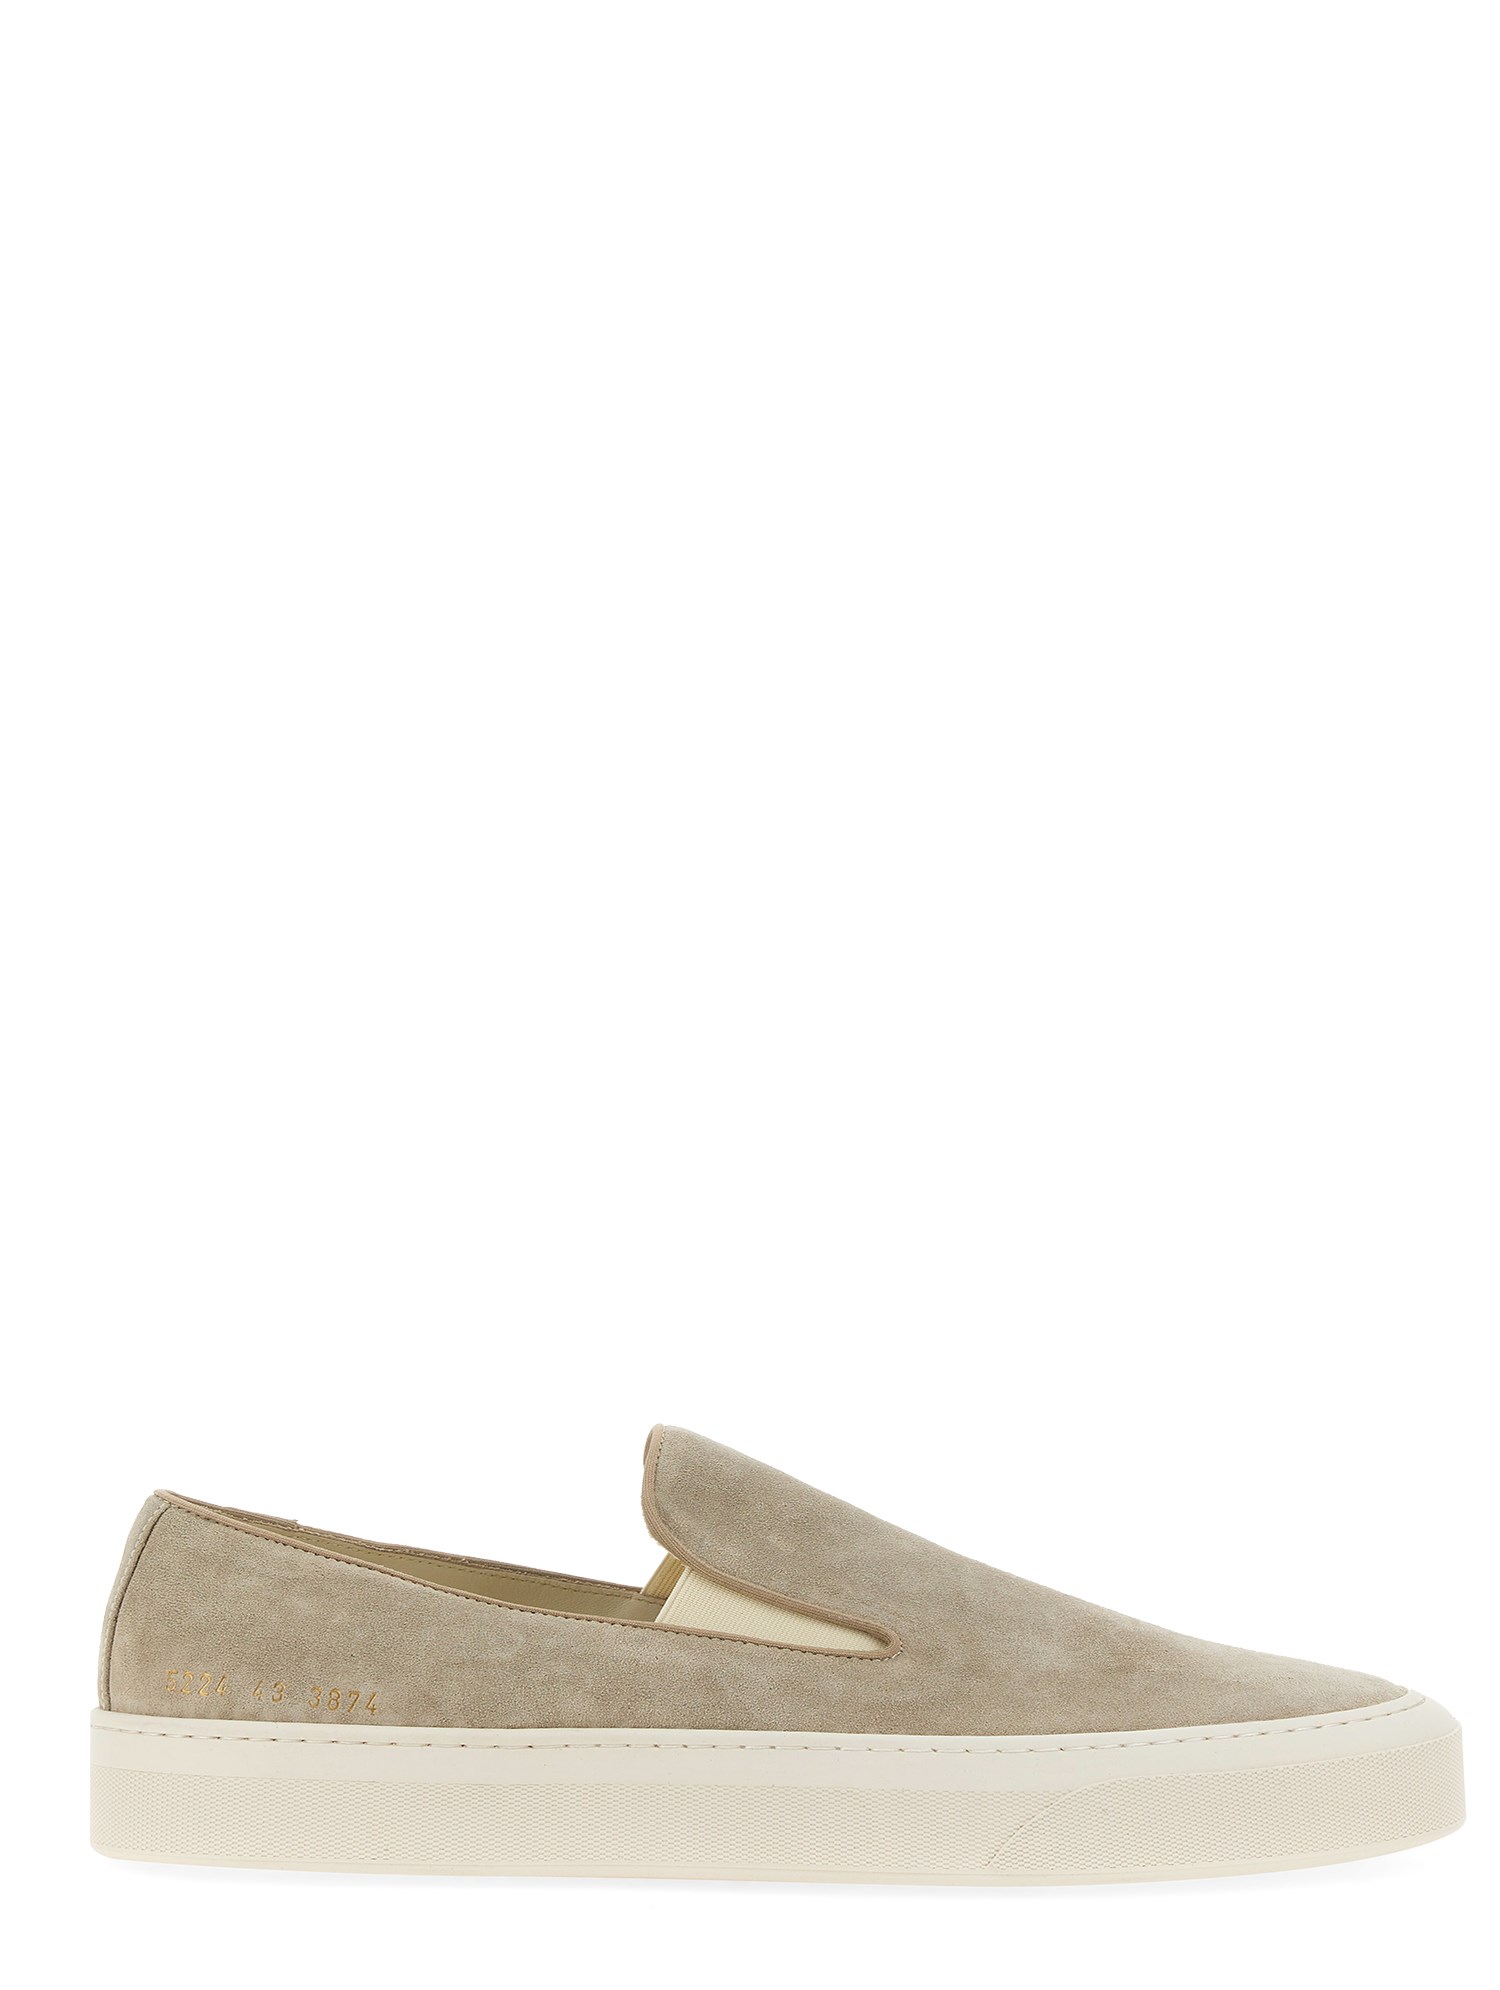 COMMON PROJECTS common projects suede slip-on sneaker